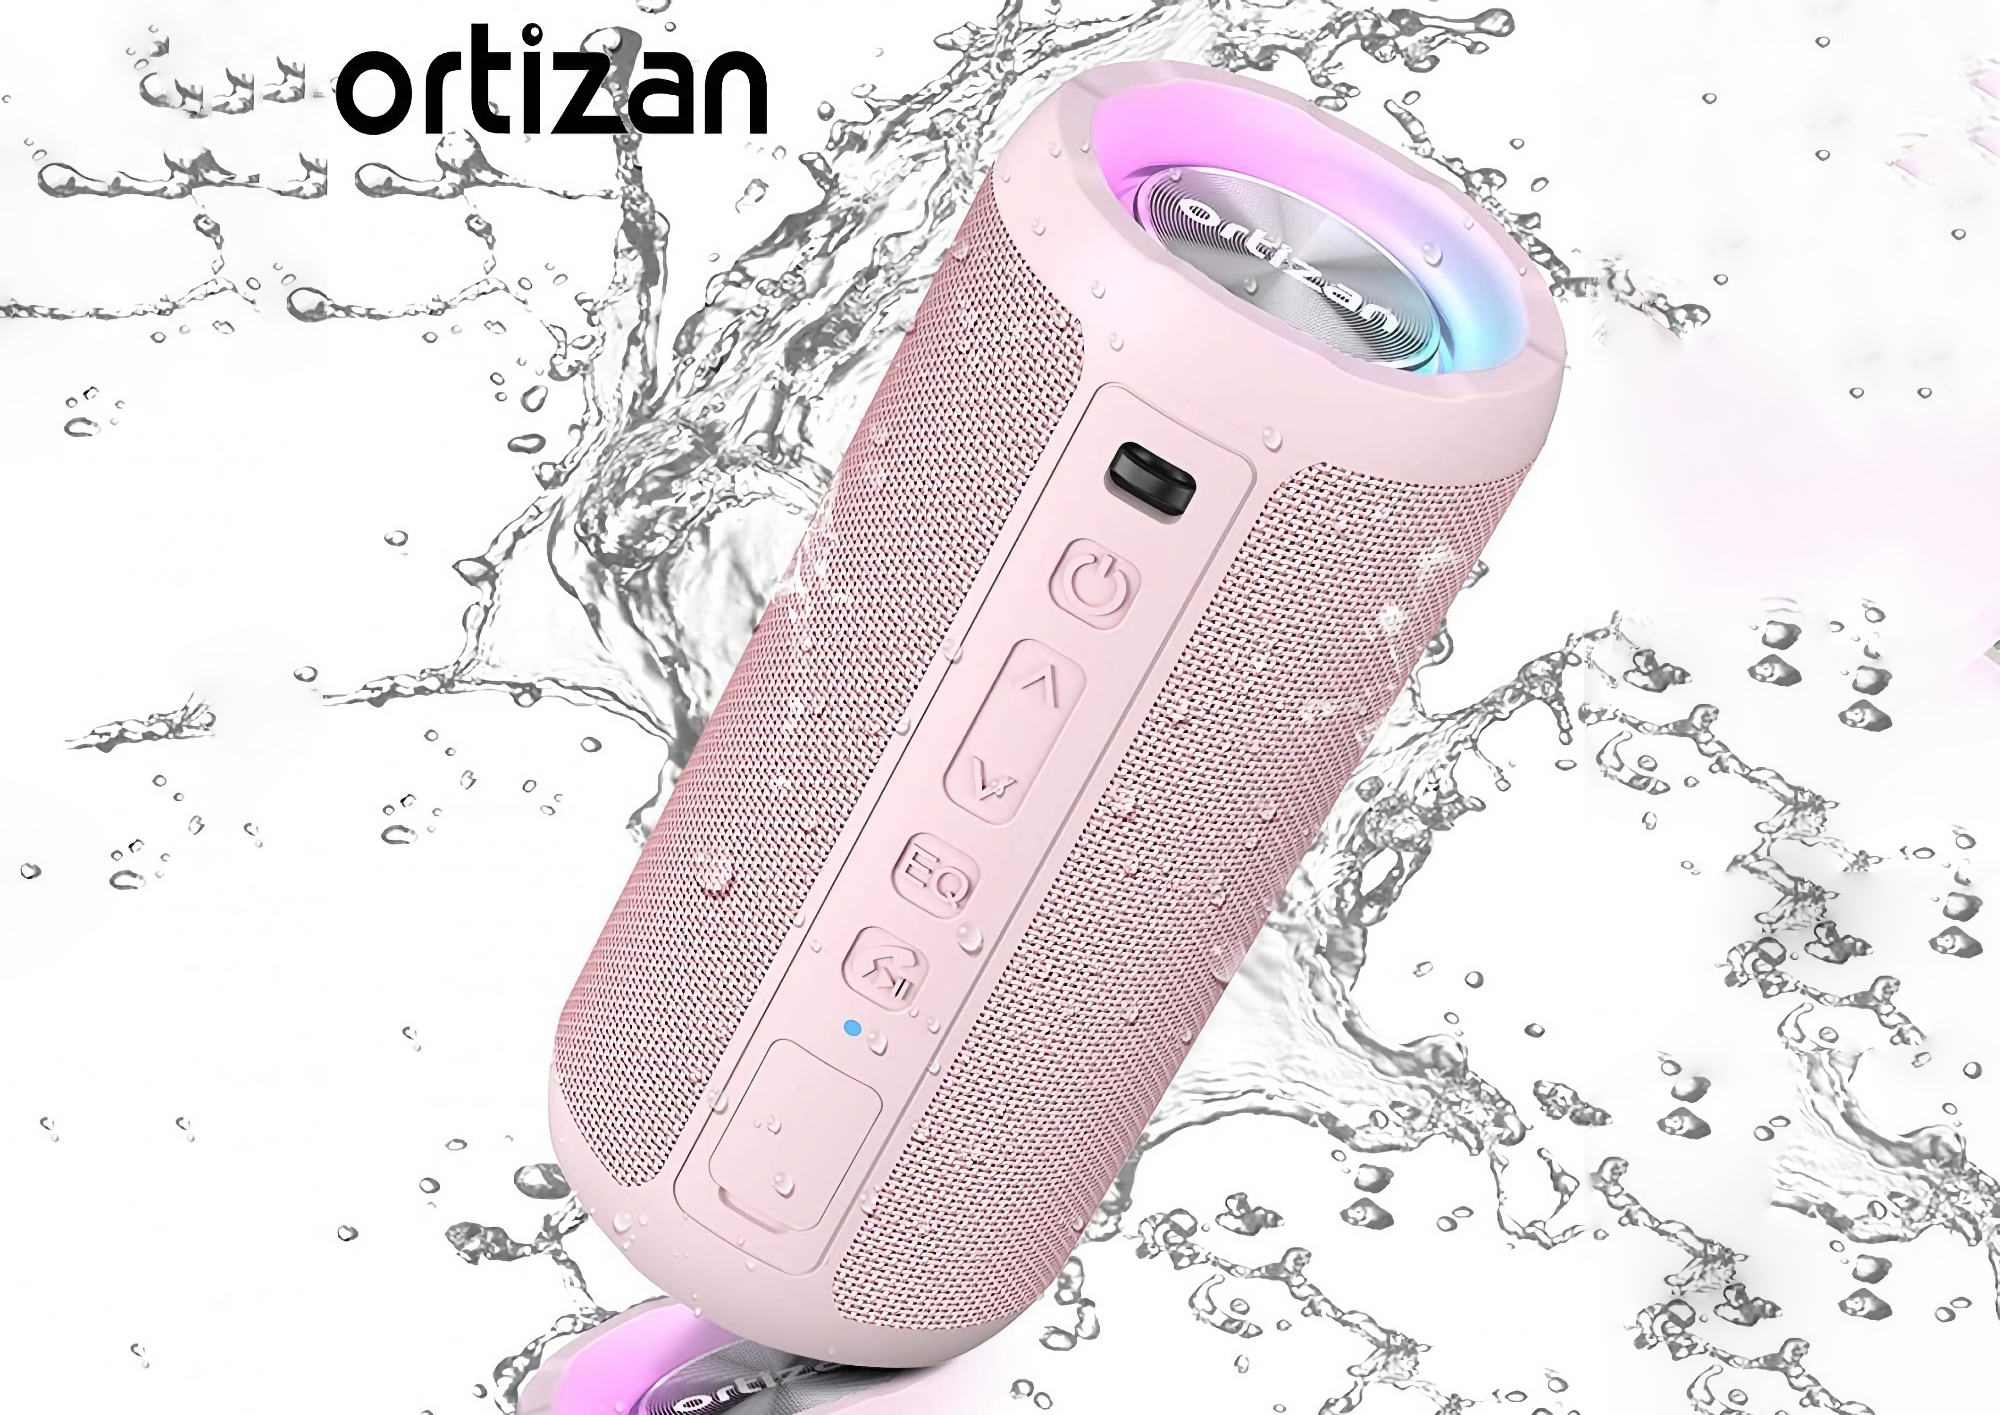 Ortizan X10 on Amazon: Wireless speaker with RGB lighting, IPX7 protection, and up to 30 hours of battery life for $19 off